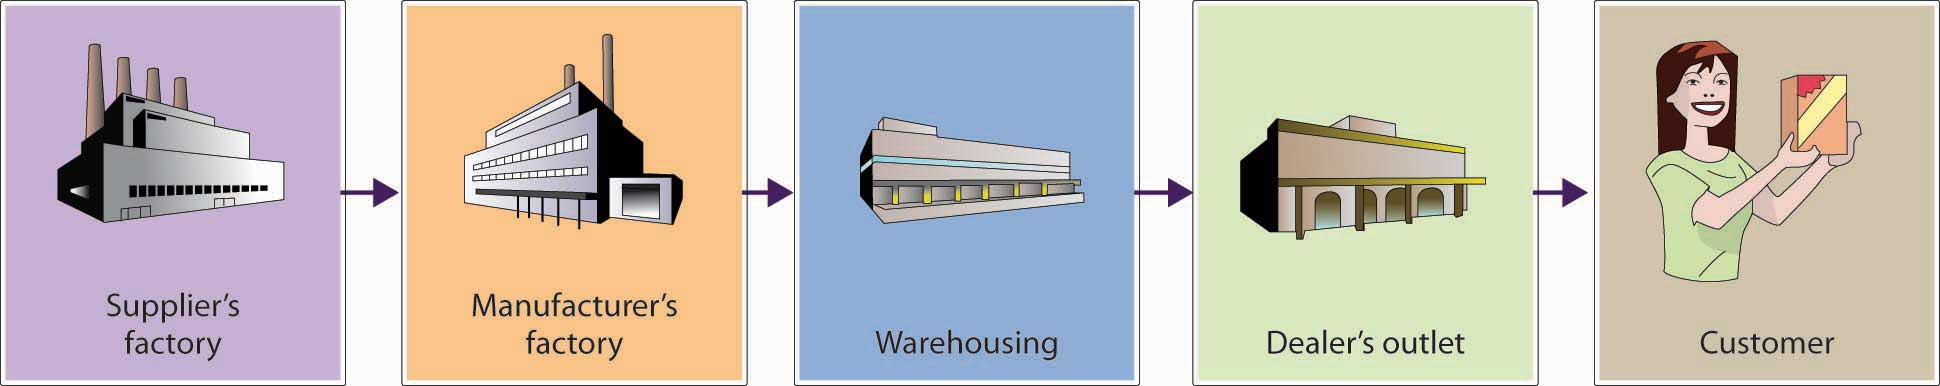 Manufacturer's factory to Warehousing to Dealer's outlet to Customer